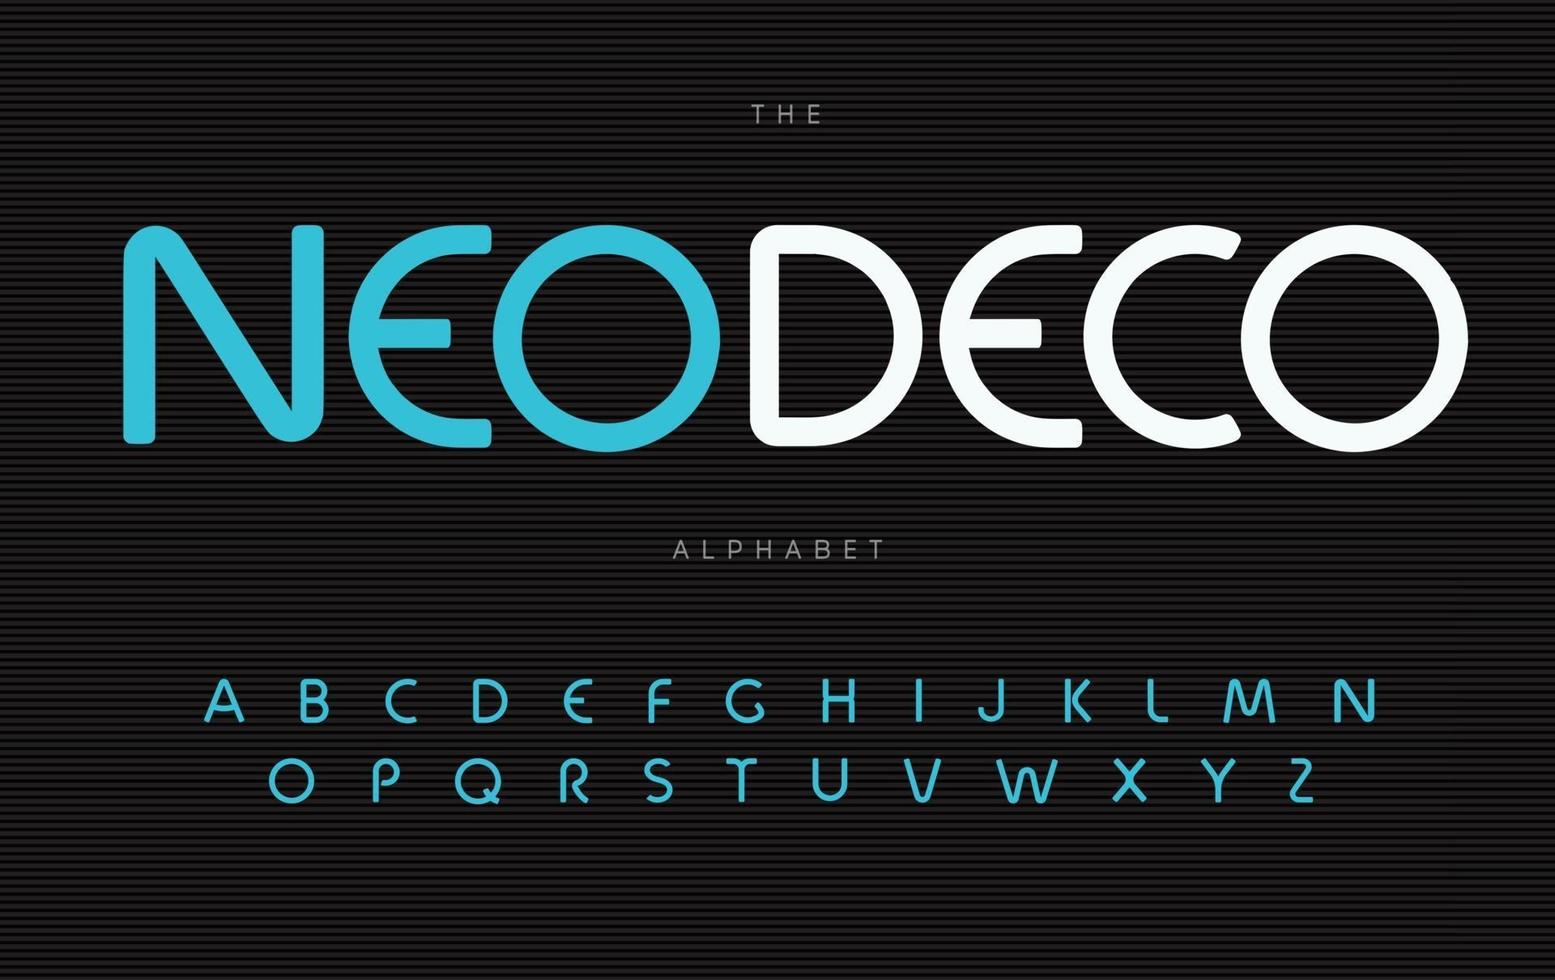 Nouveau deco alphabet. Neo deco elegance font, type for modern futuristic logo, headline, monogram, creative lettering and typography. Minimal style sans rounded letters, vector typographic design